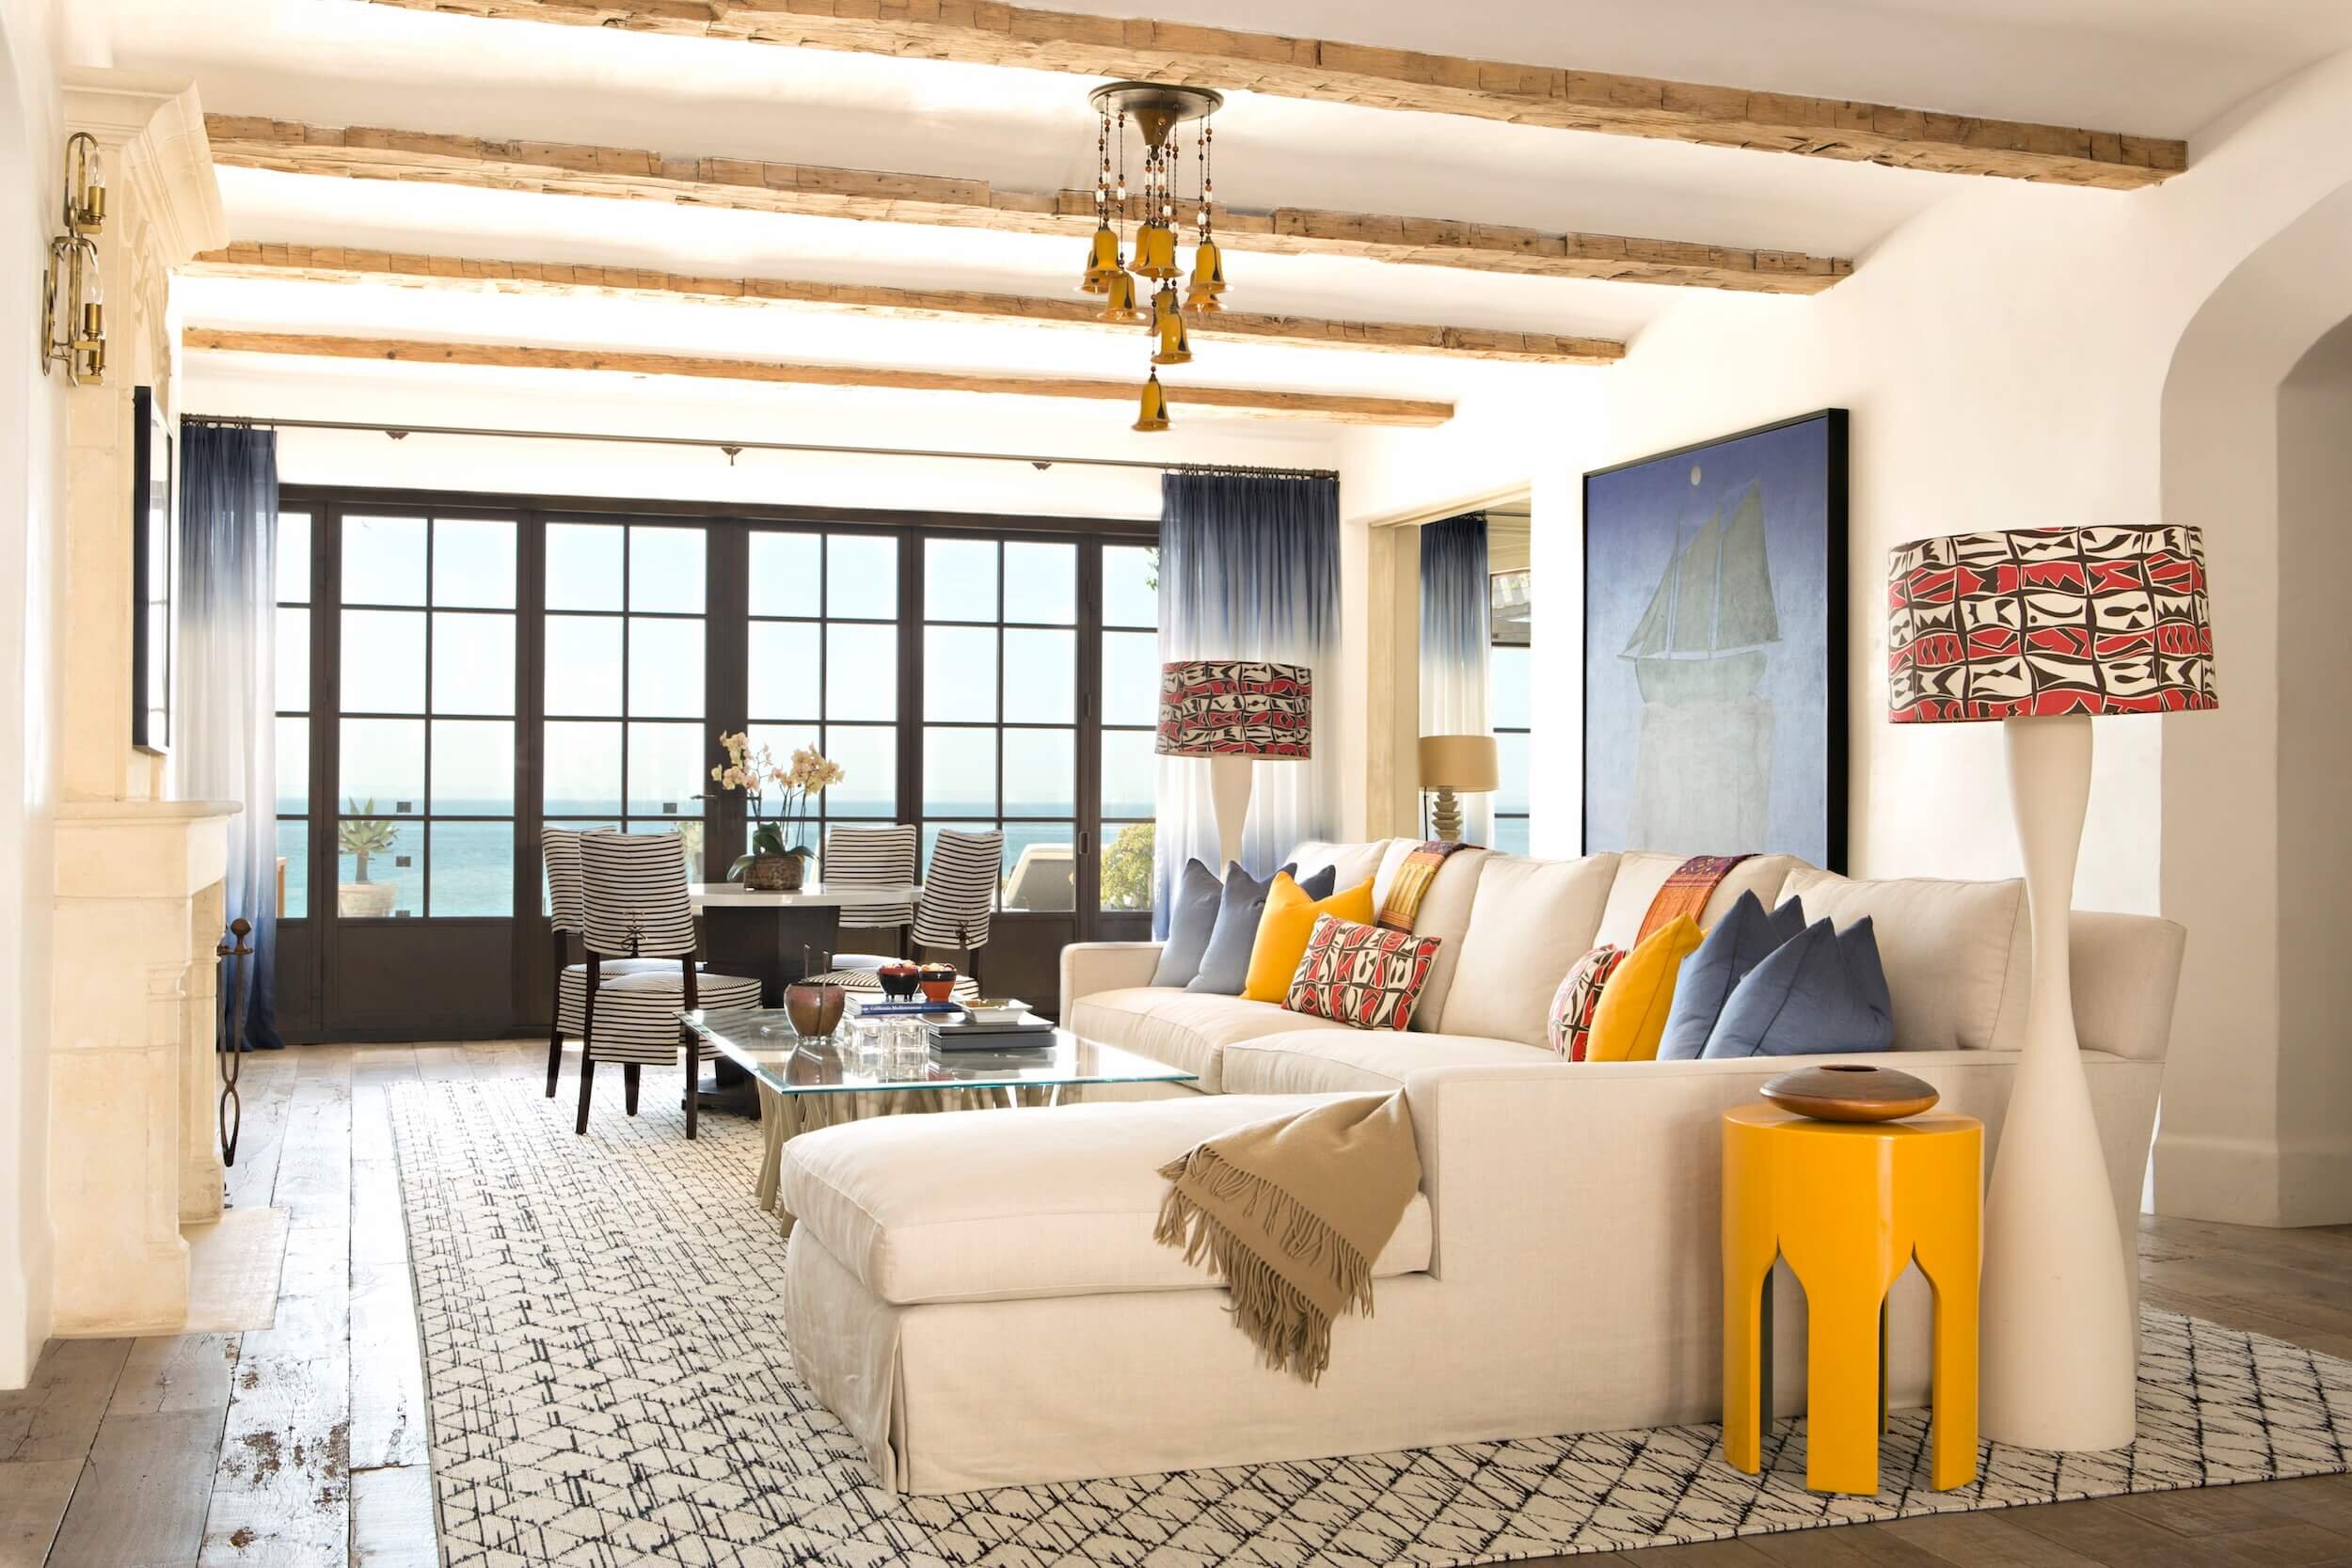 A Living room with ivory sofas and moroccan accents, stark carpeting and custom drapery